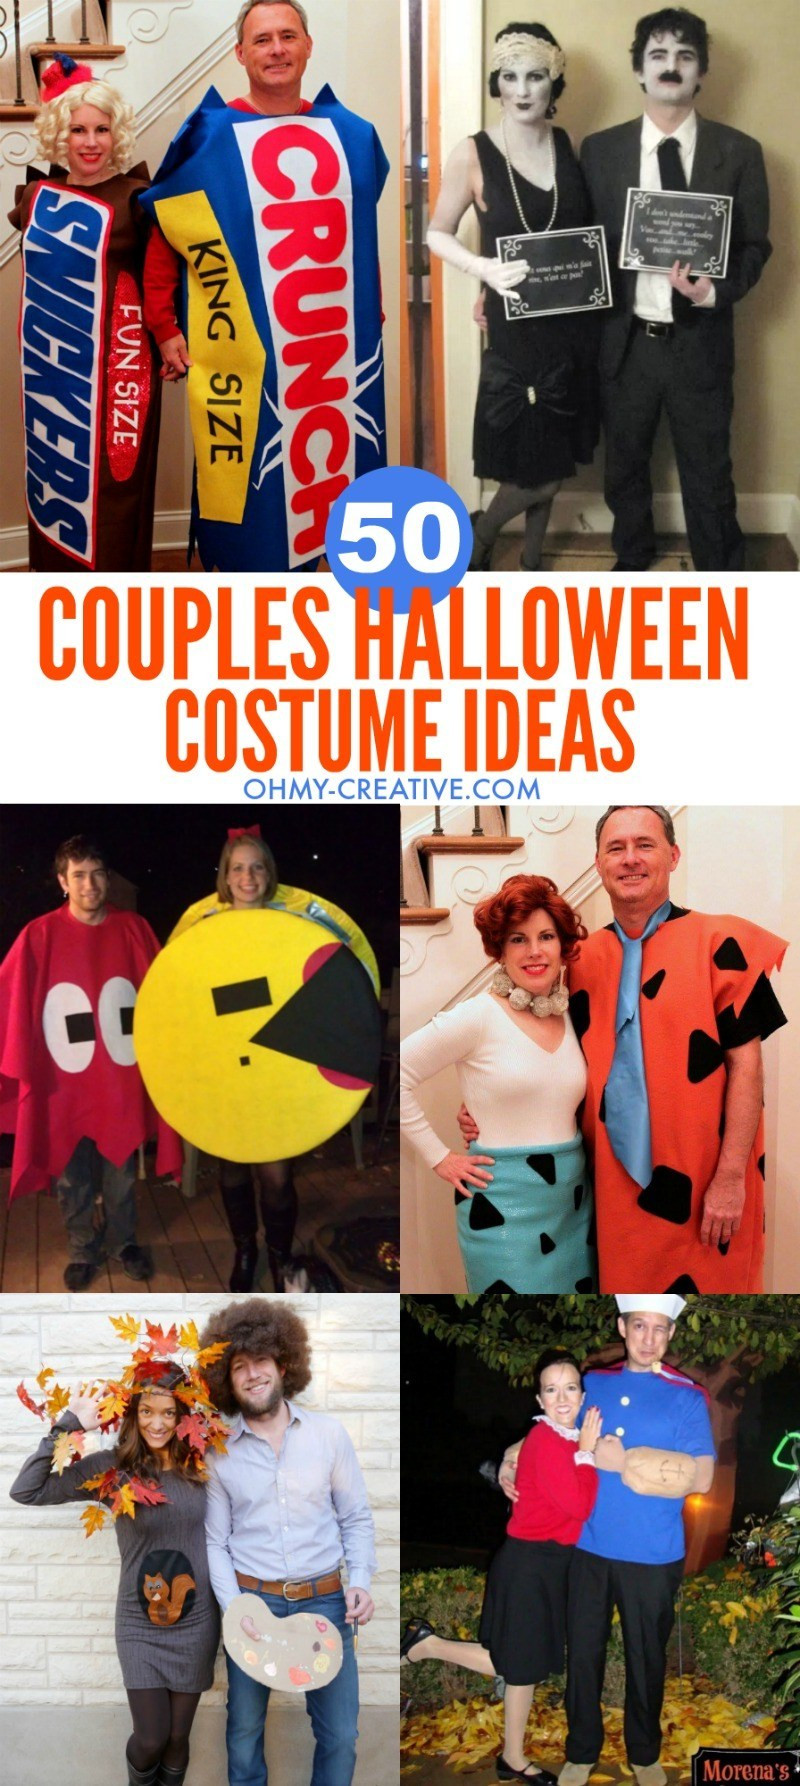 Halloween Party Costumes Ideas
 50 Couples Halloween Costume Ideas Oh My Creative